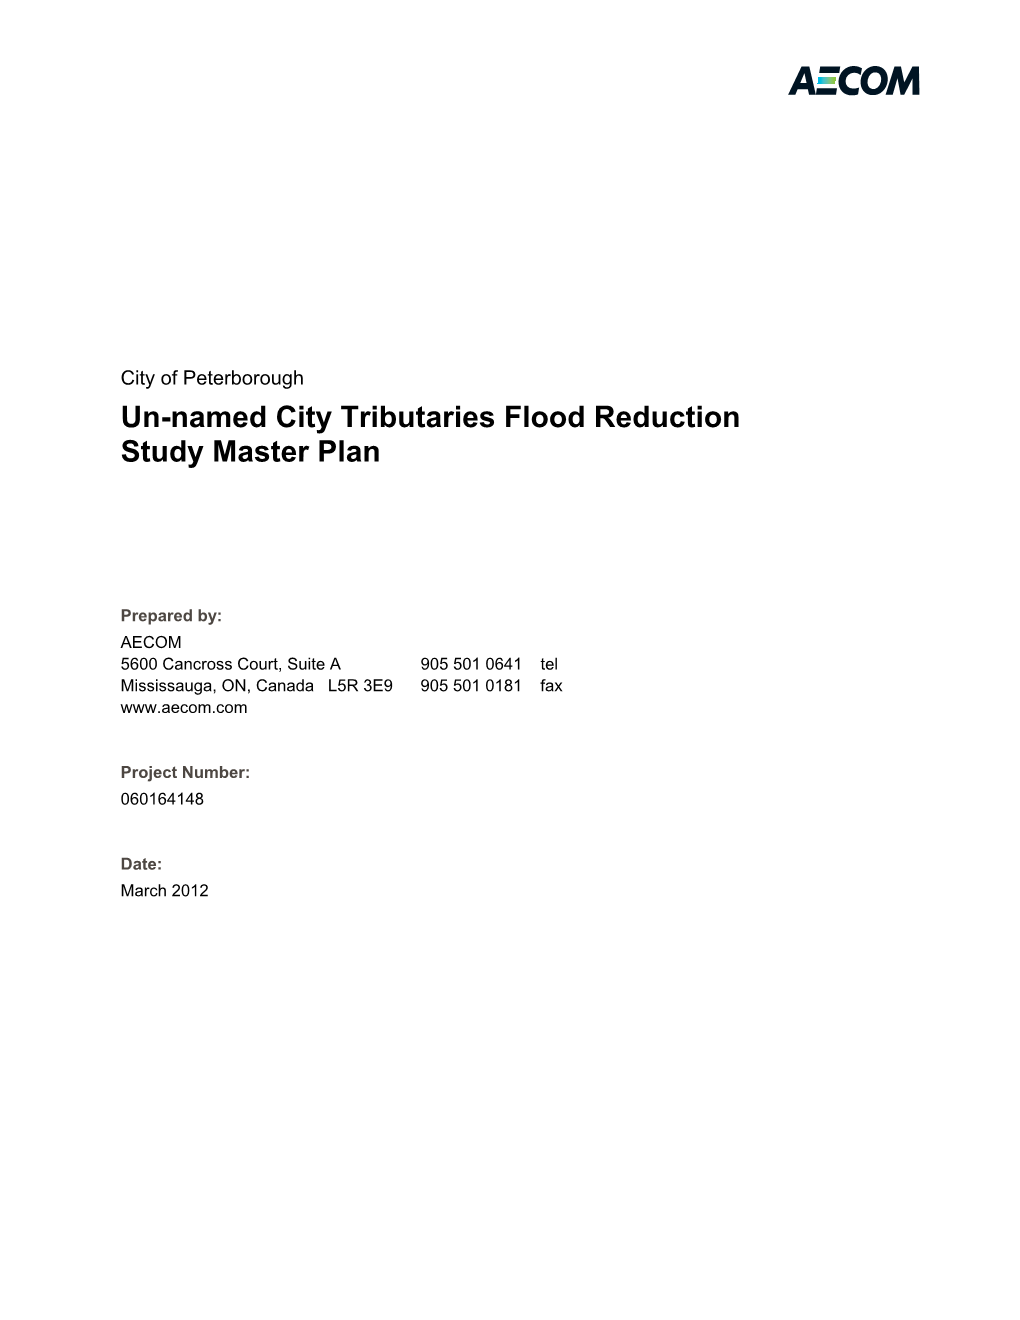 Un-Named City Tributaries Flood Reduction Study Master Plan